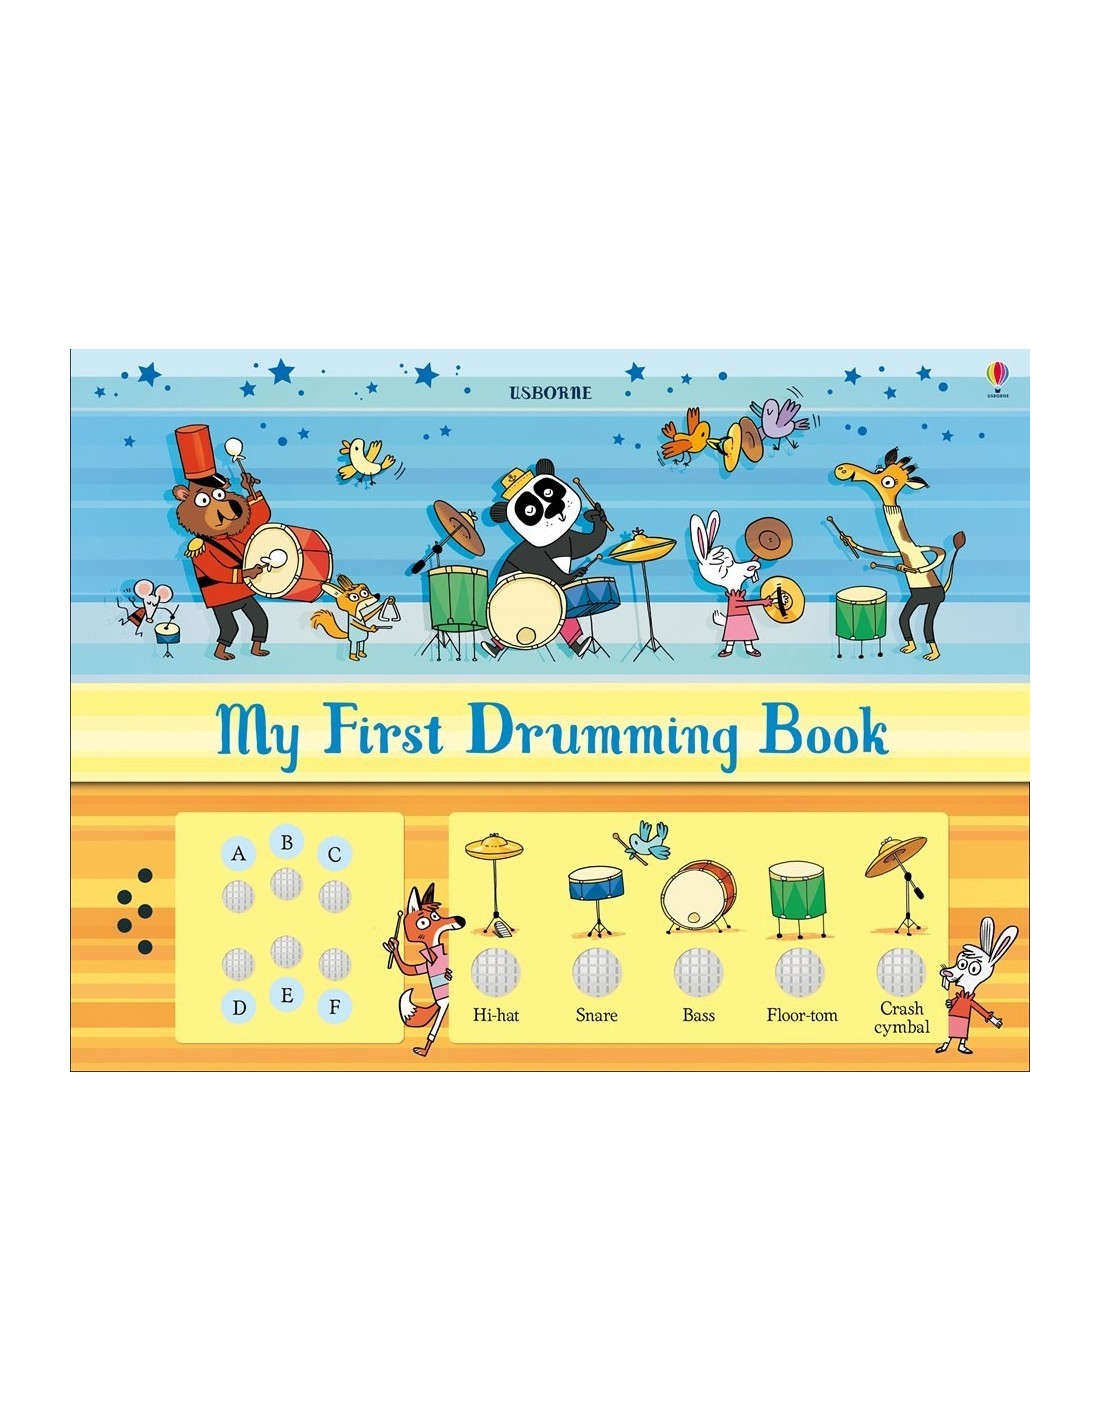 My first drumming book